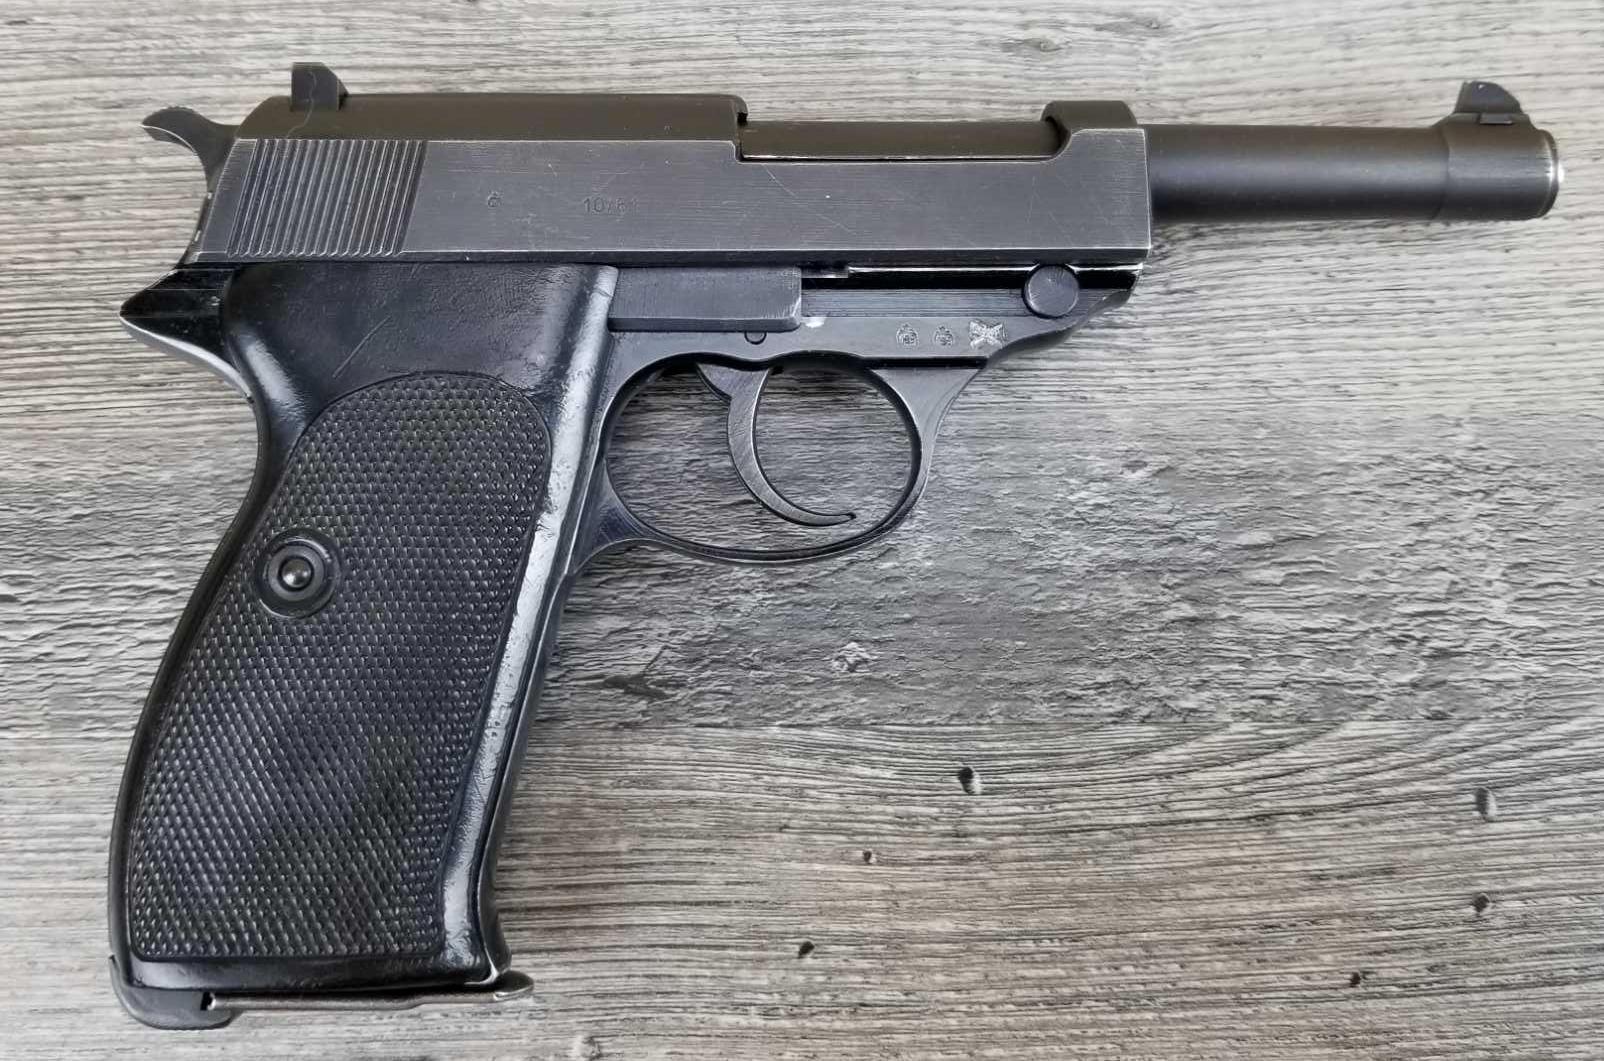 WALTHER MODEL P1